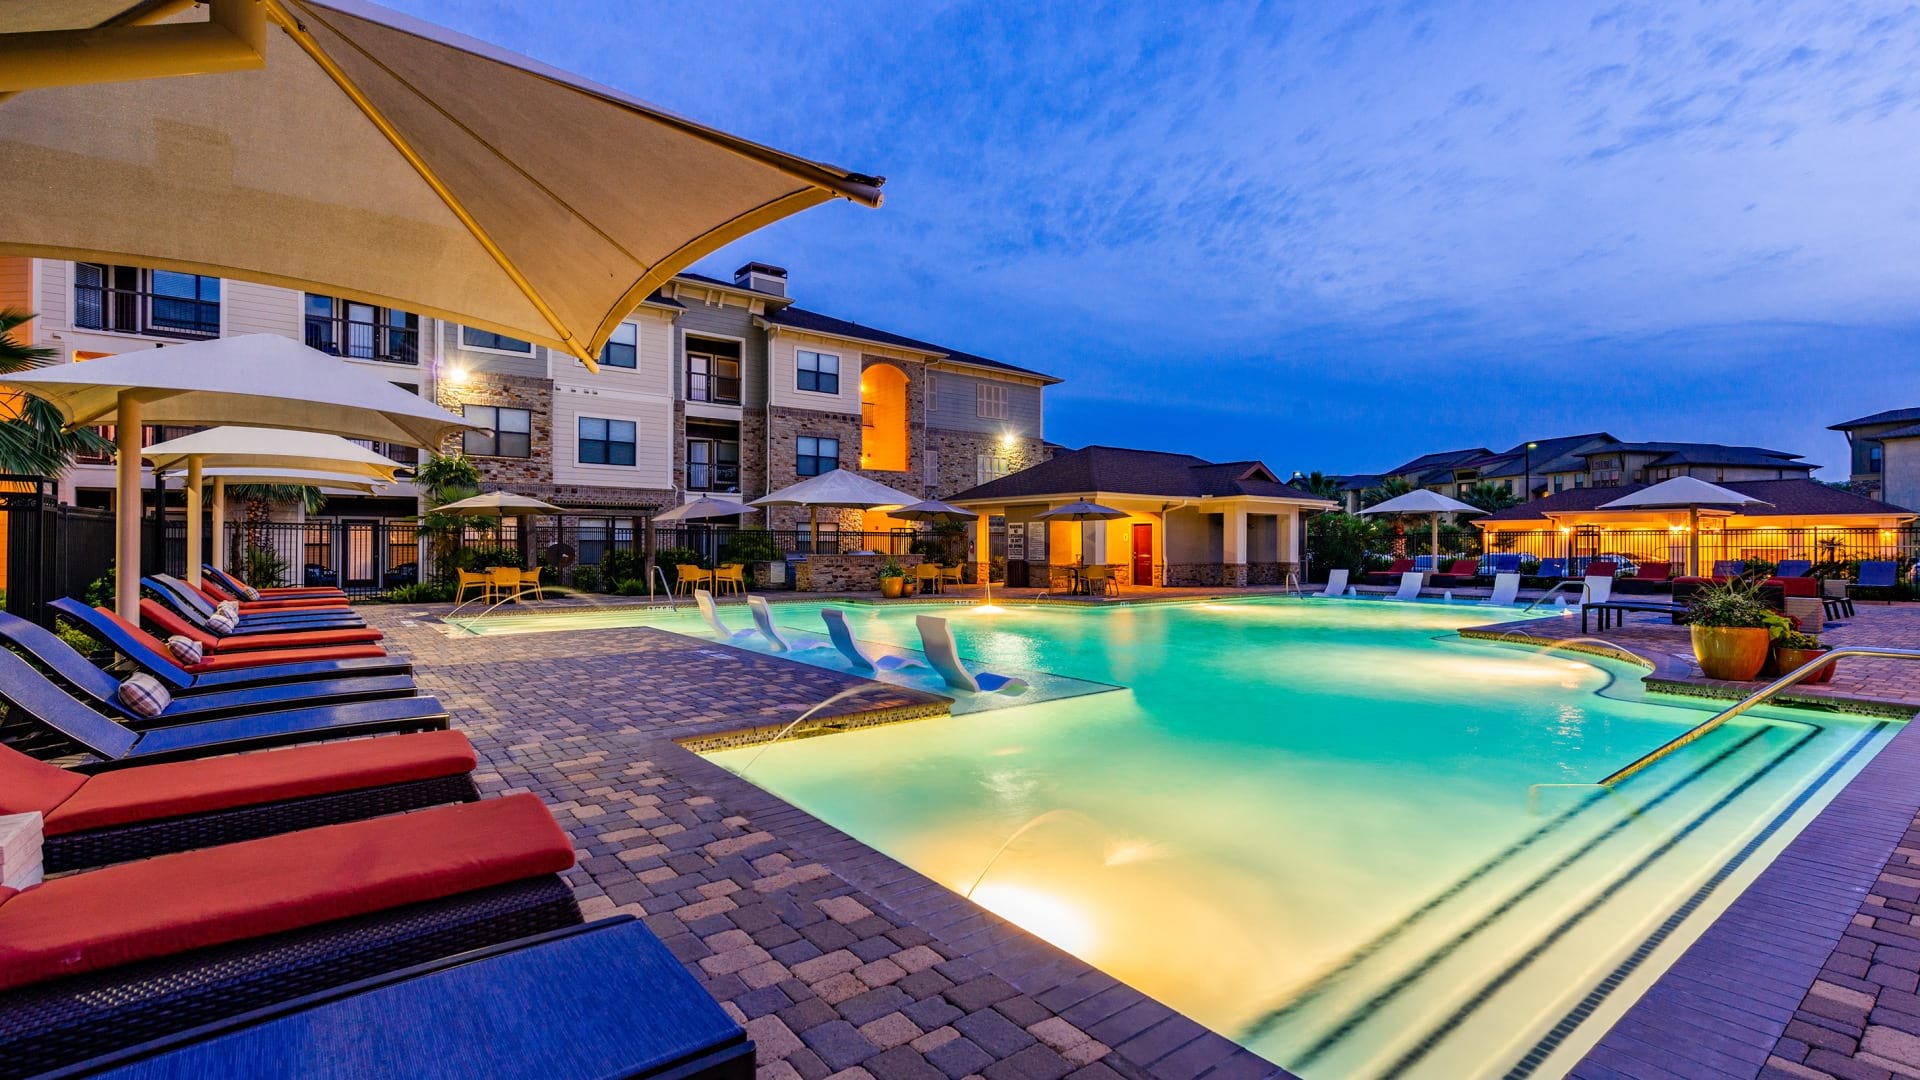 Resort-style pool at apartments in Houston, TX